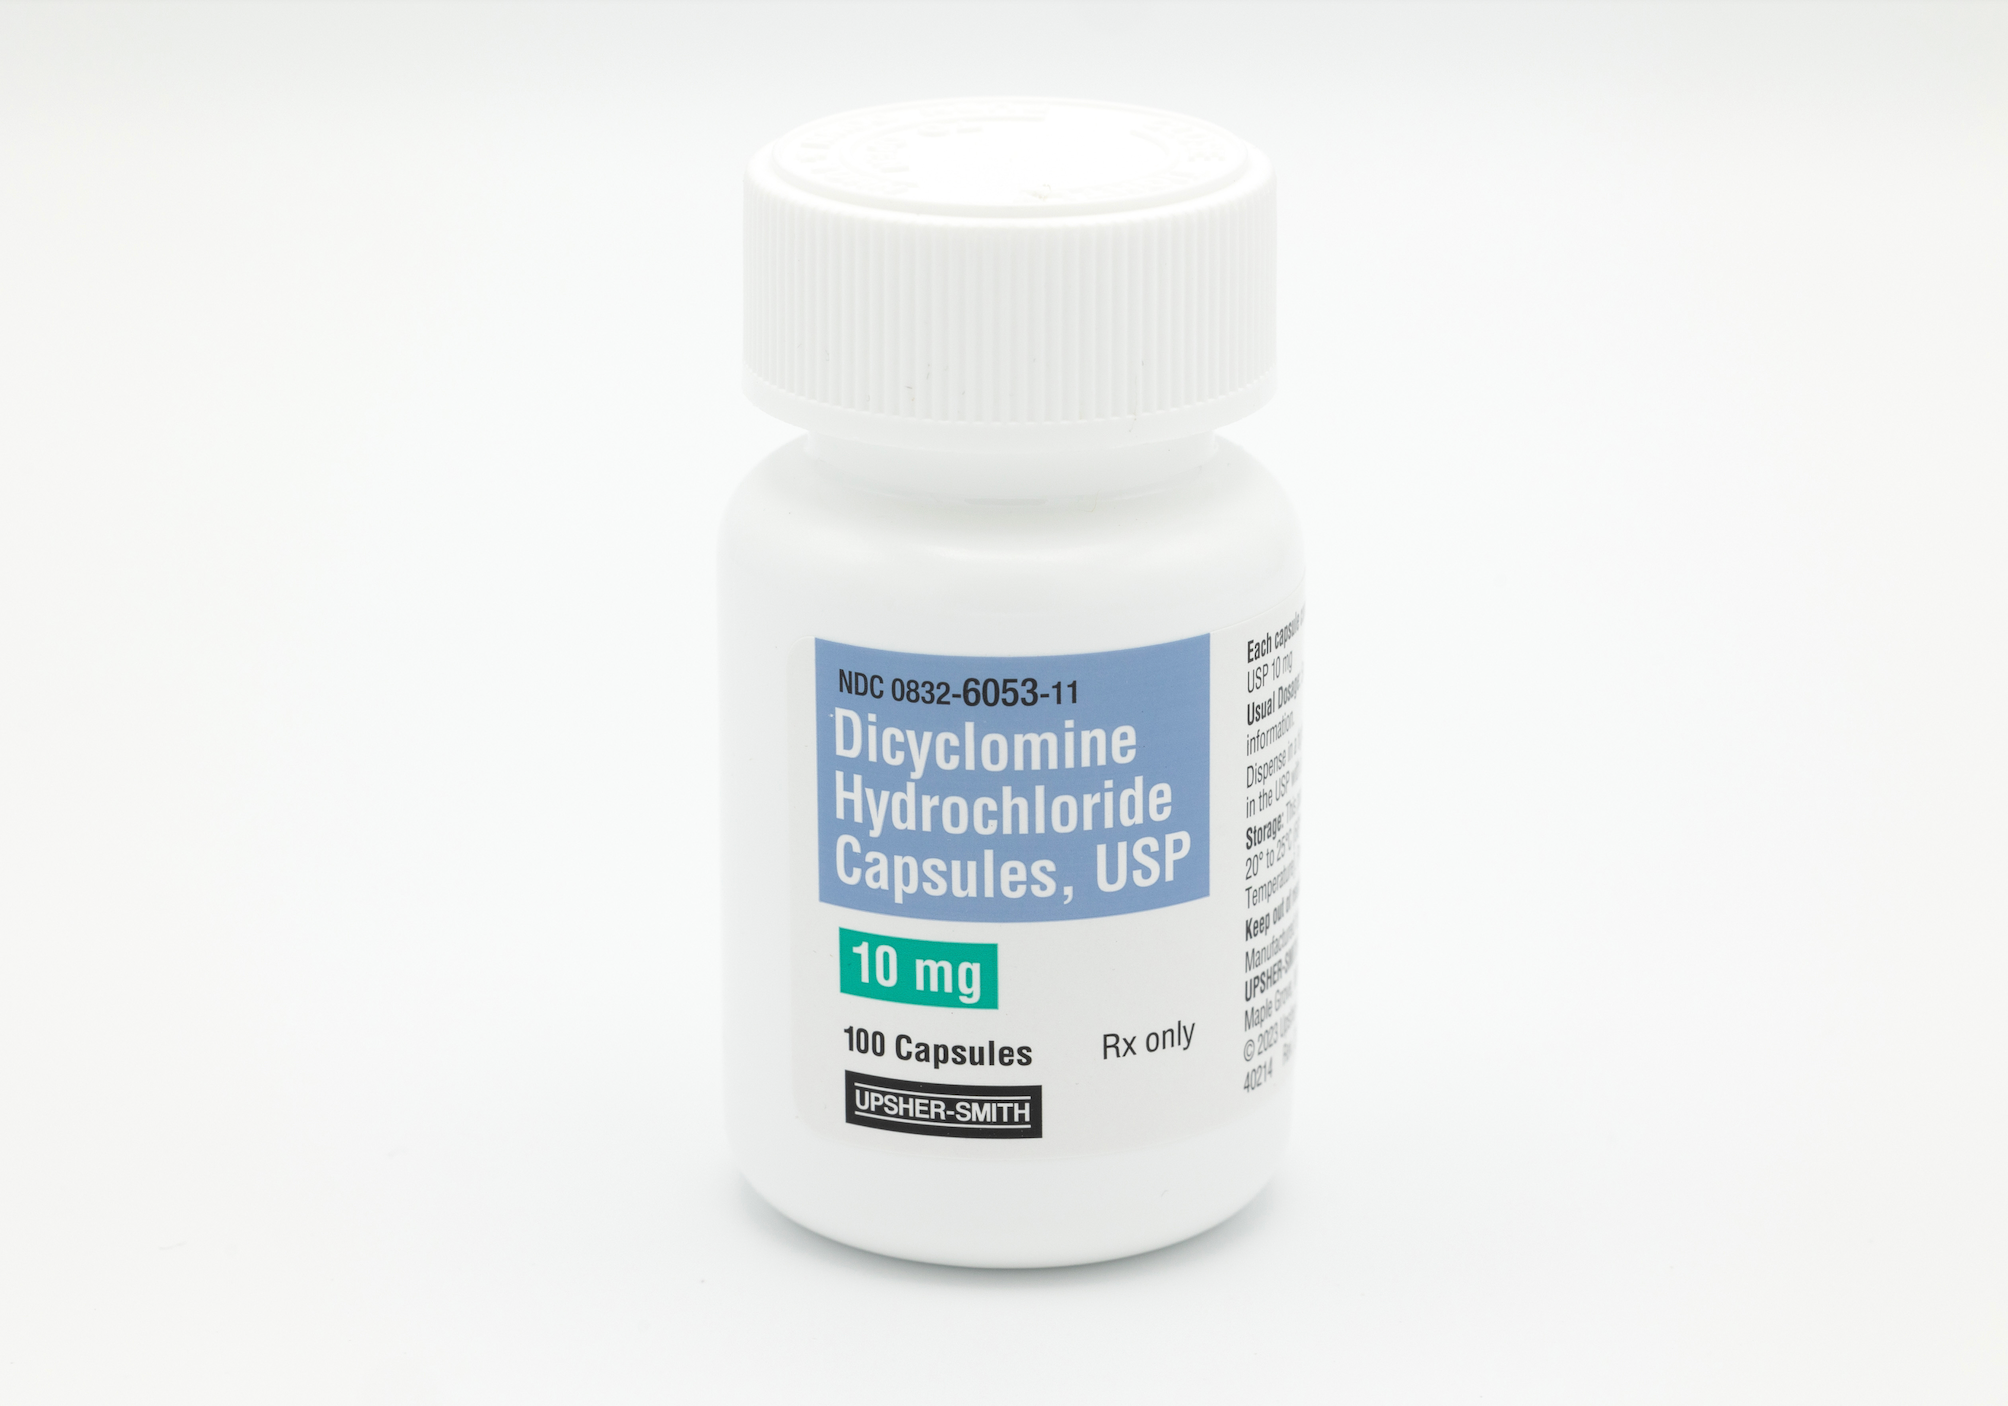 Dicyclomine Hydrochloride Capsules